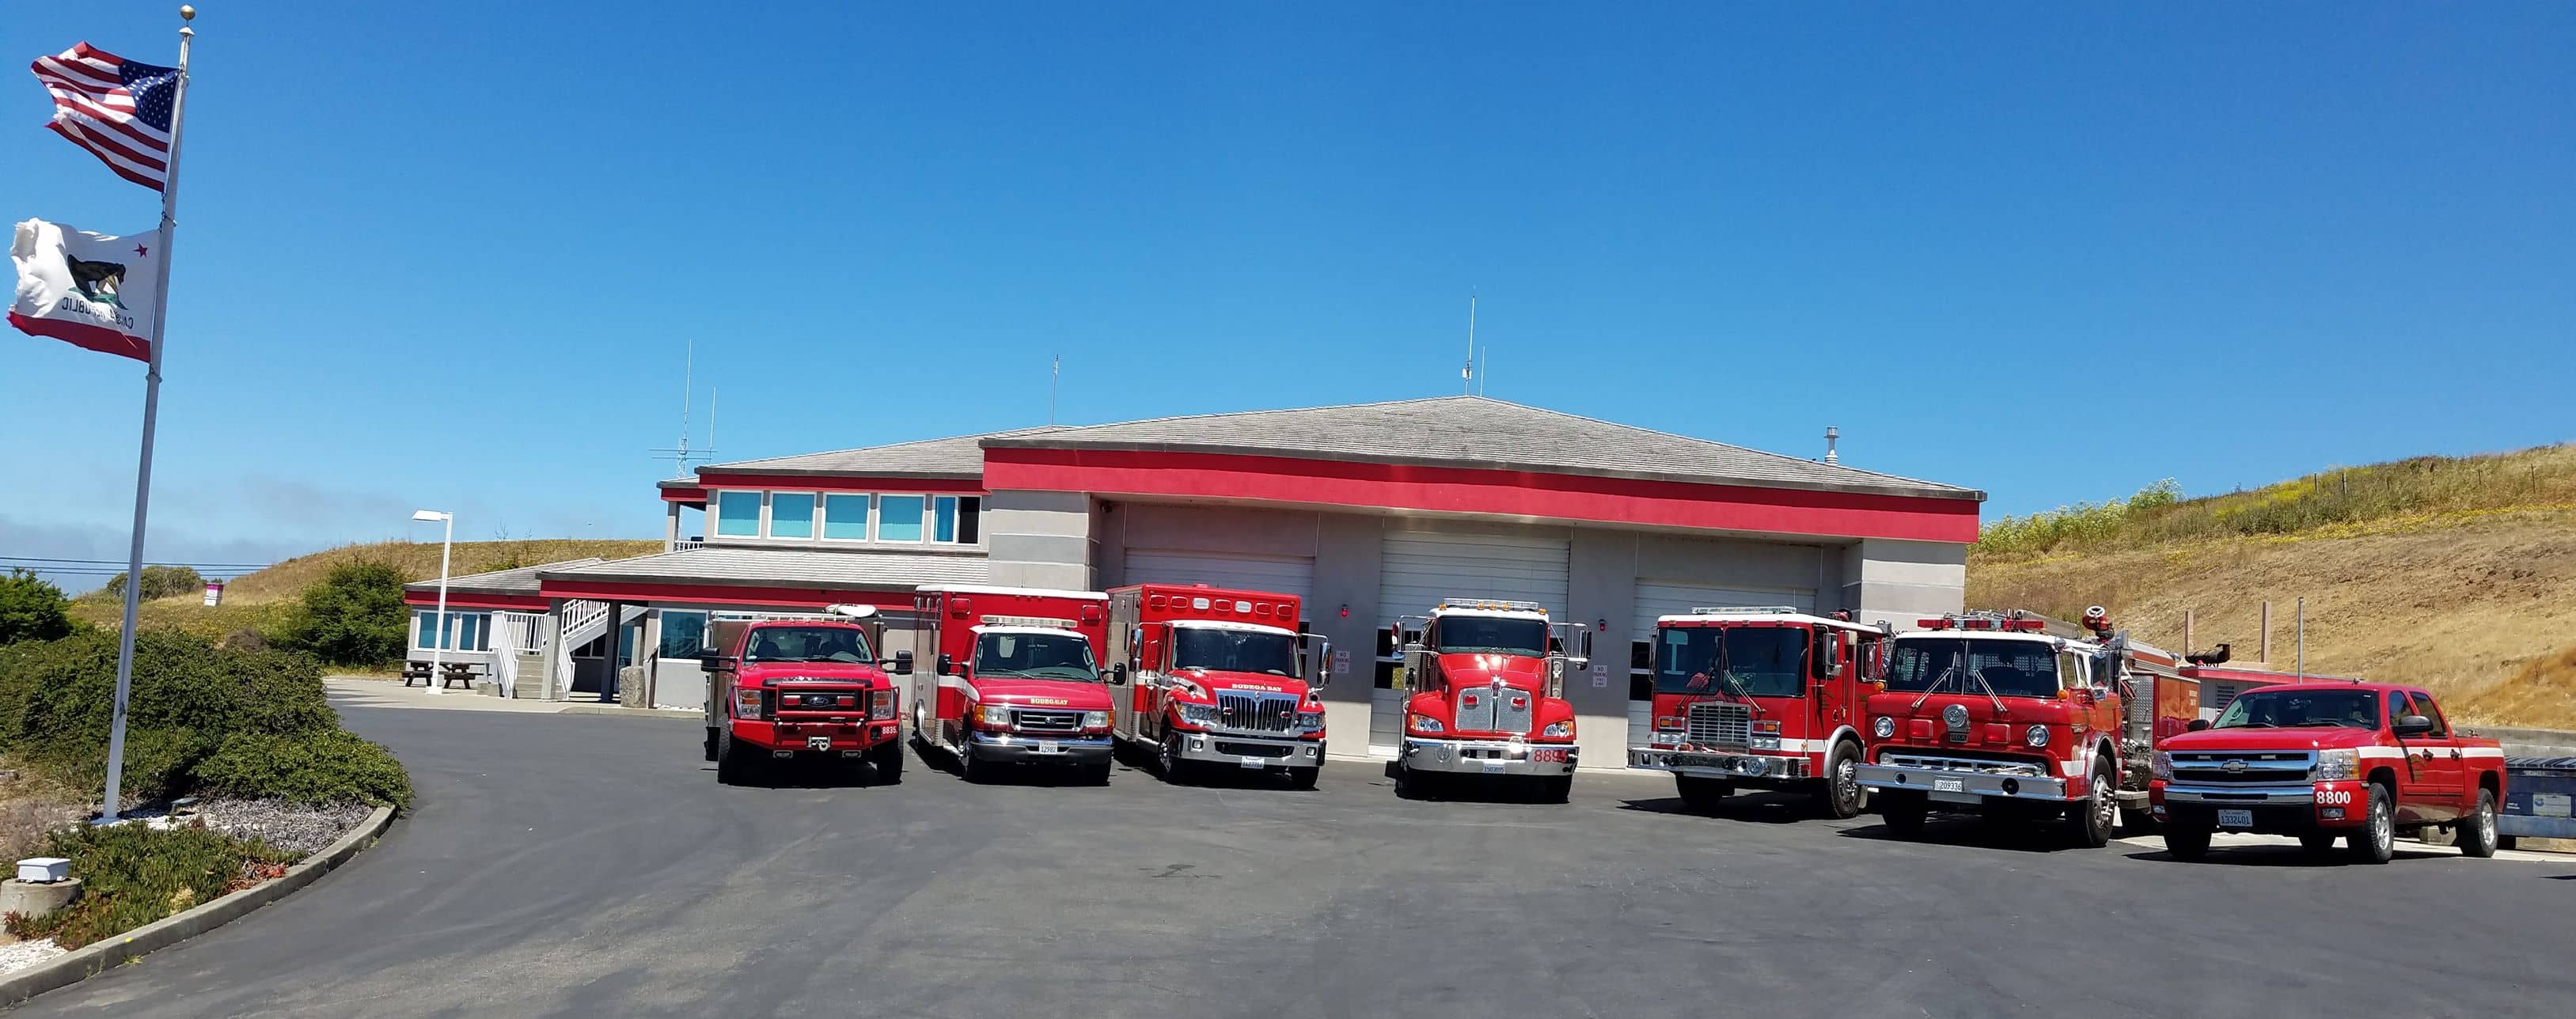 bodega-bay-fire-protection-district